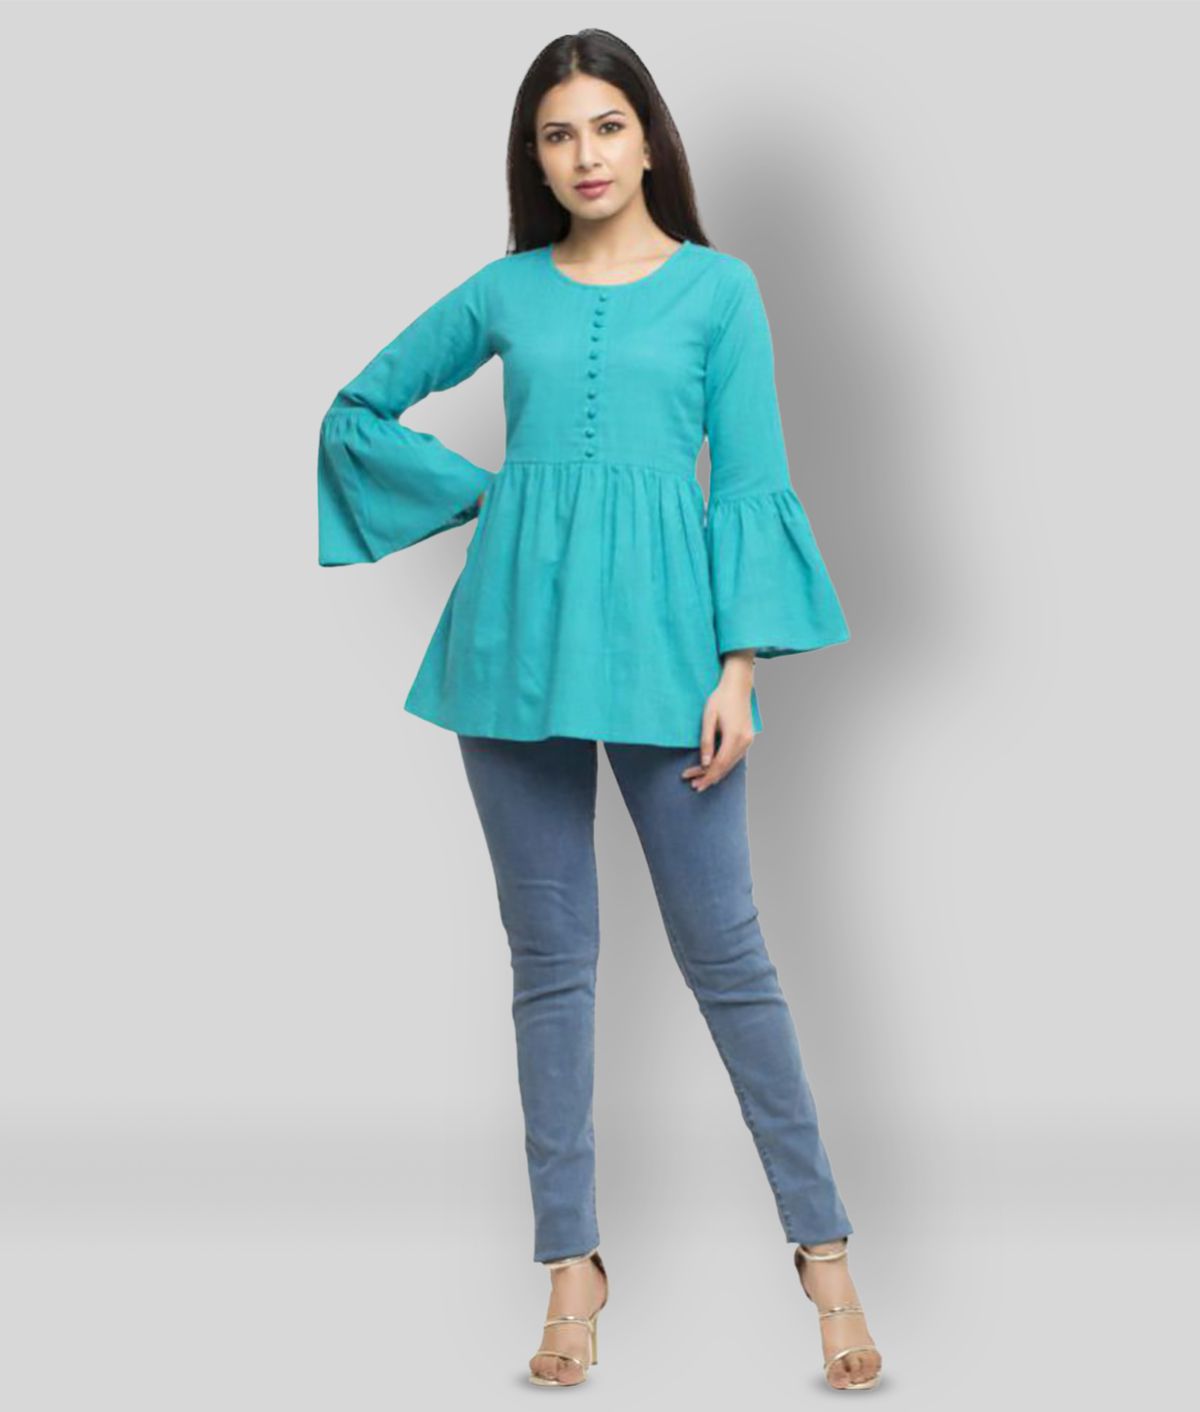     			Yash Gallery - Turquoise Cotton Women's Empire Top ( Pack of 1 )